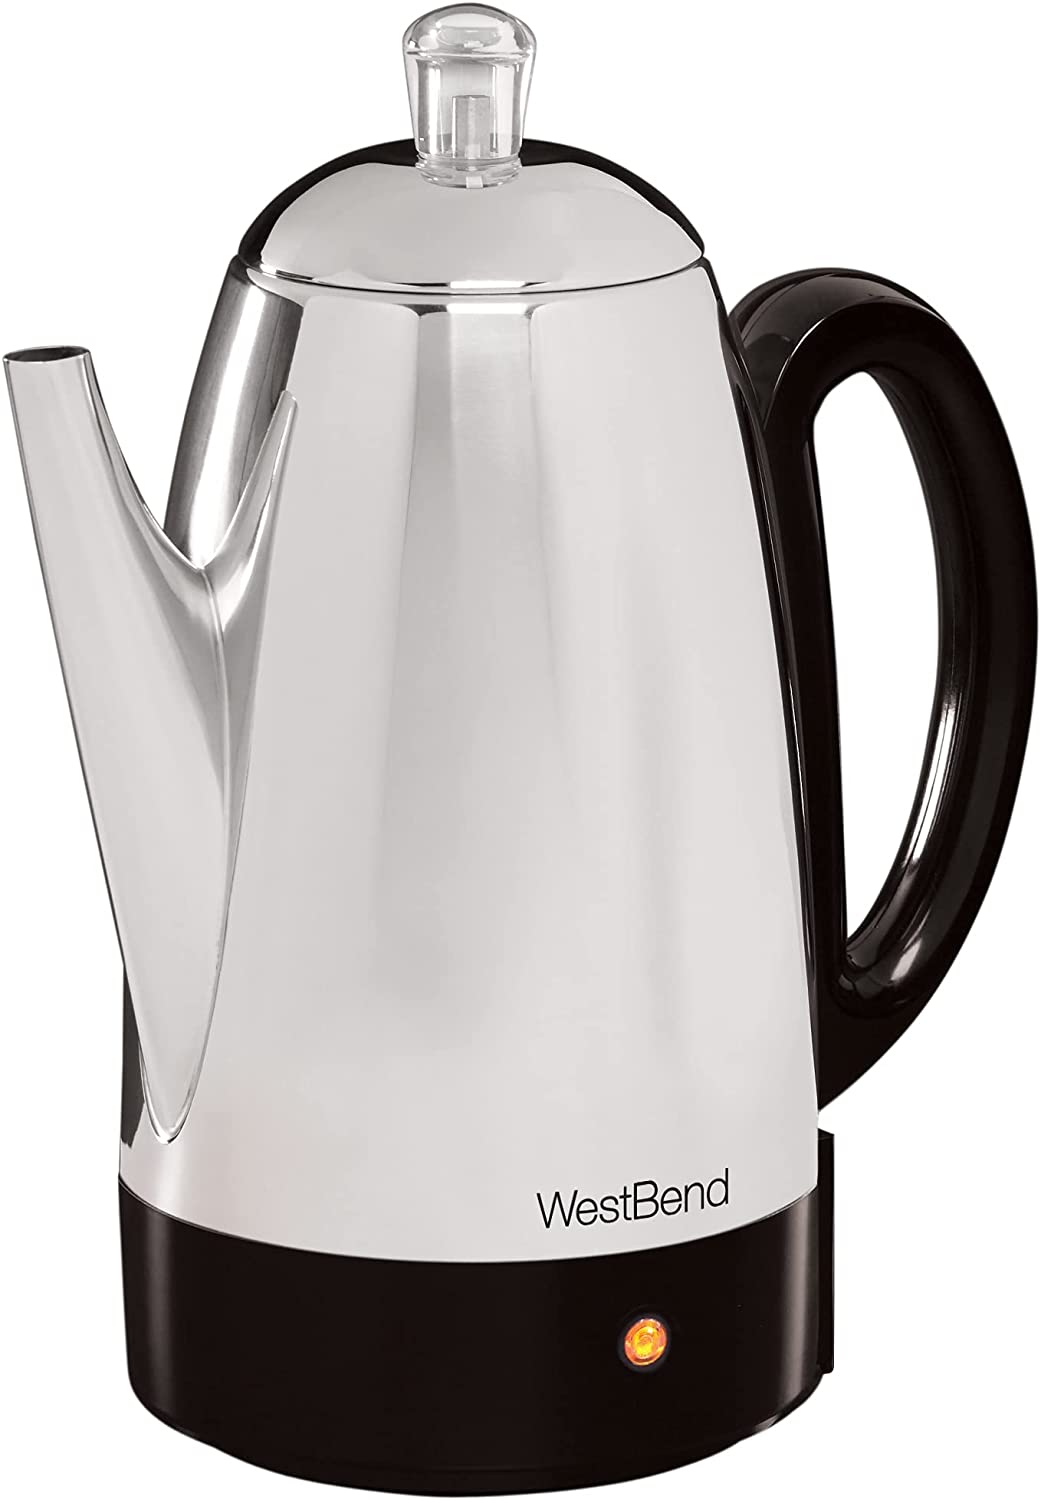 West-Bend-54159-Classic-Stainless-Steel-min